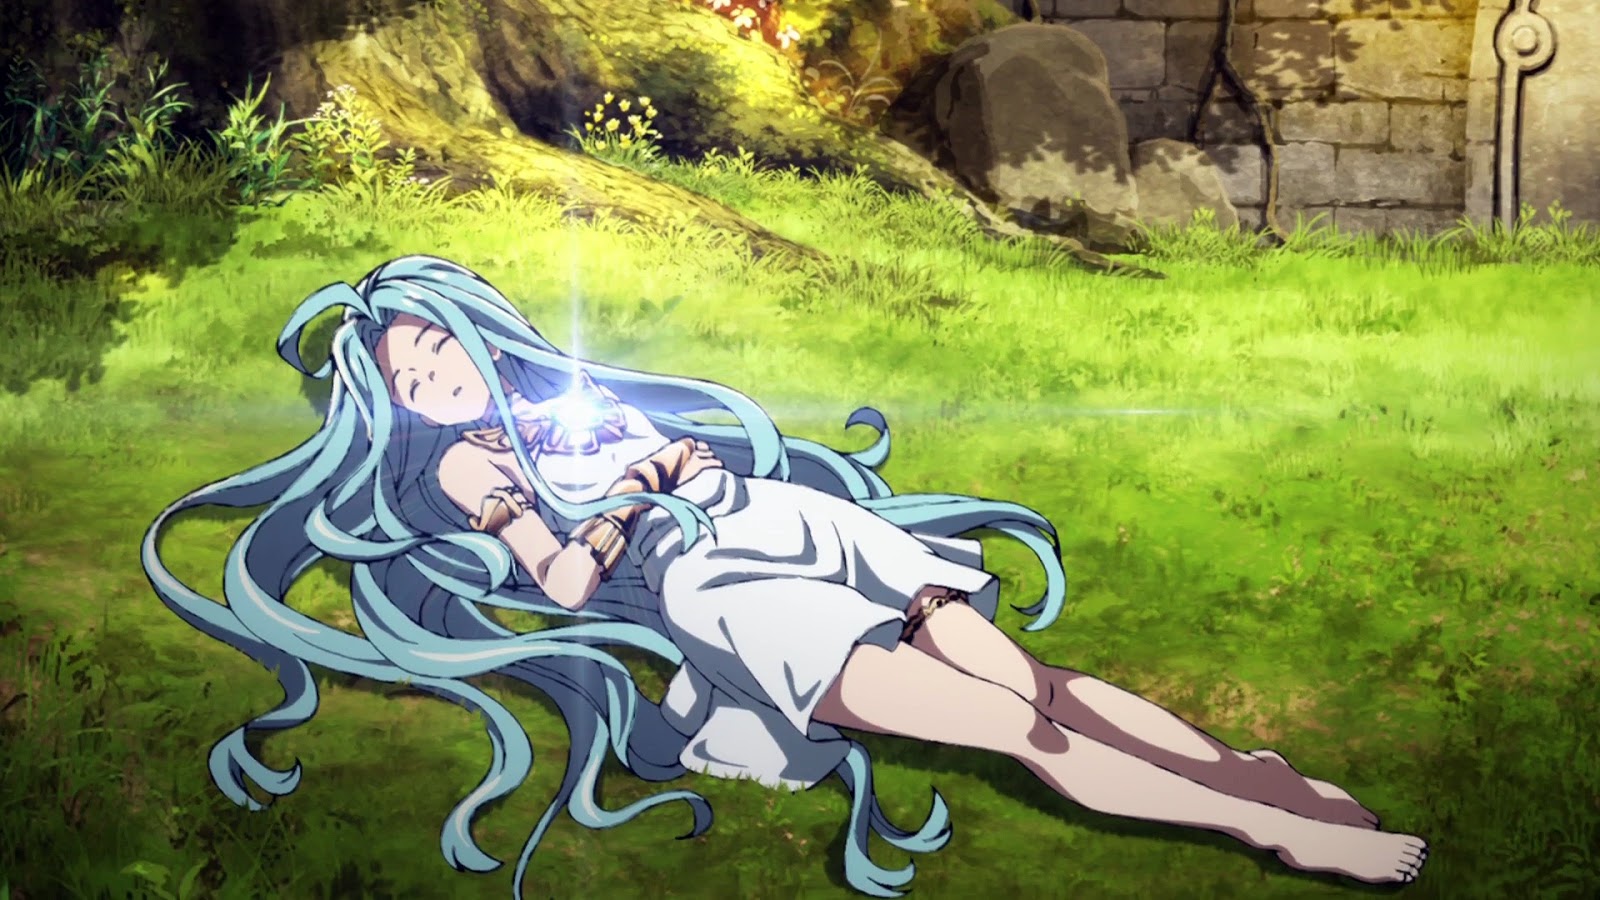 Granblue Fantasy The Animation Episode 1 Review: Follow The Yellow